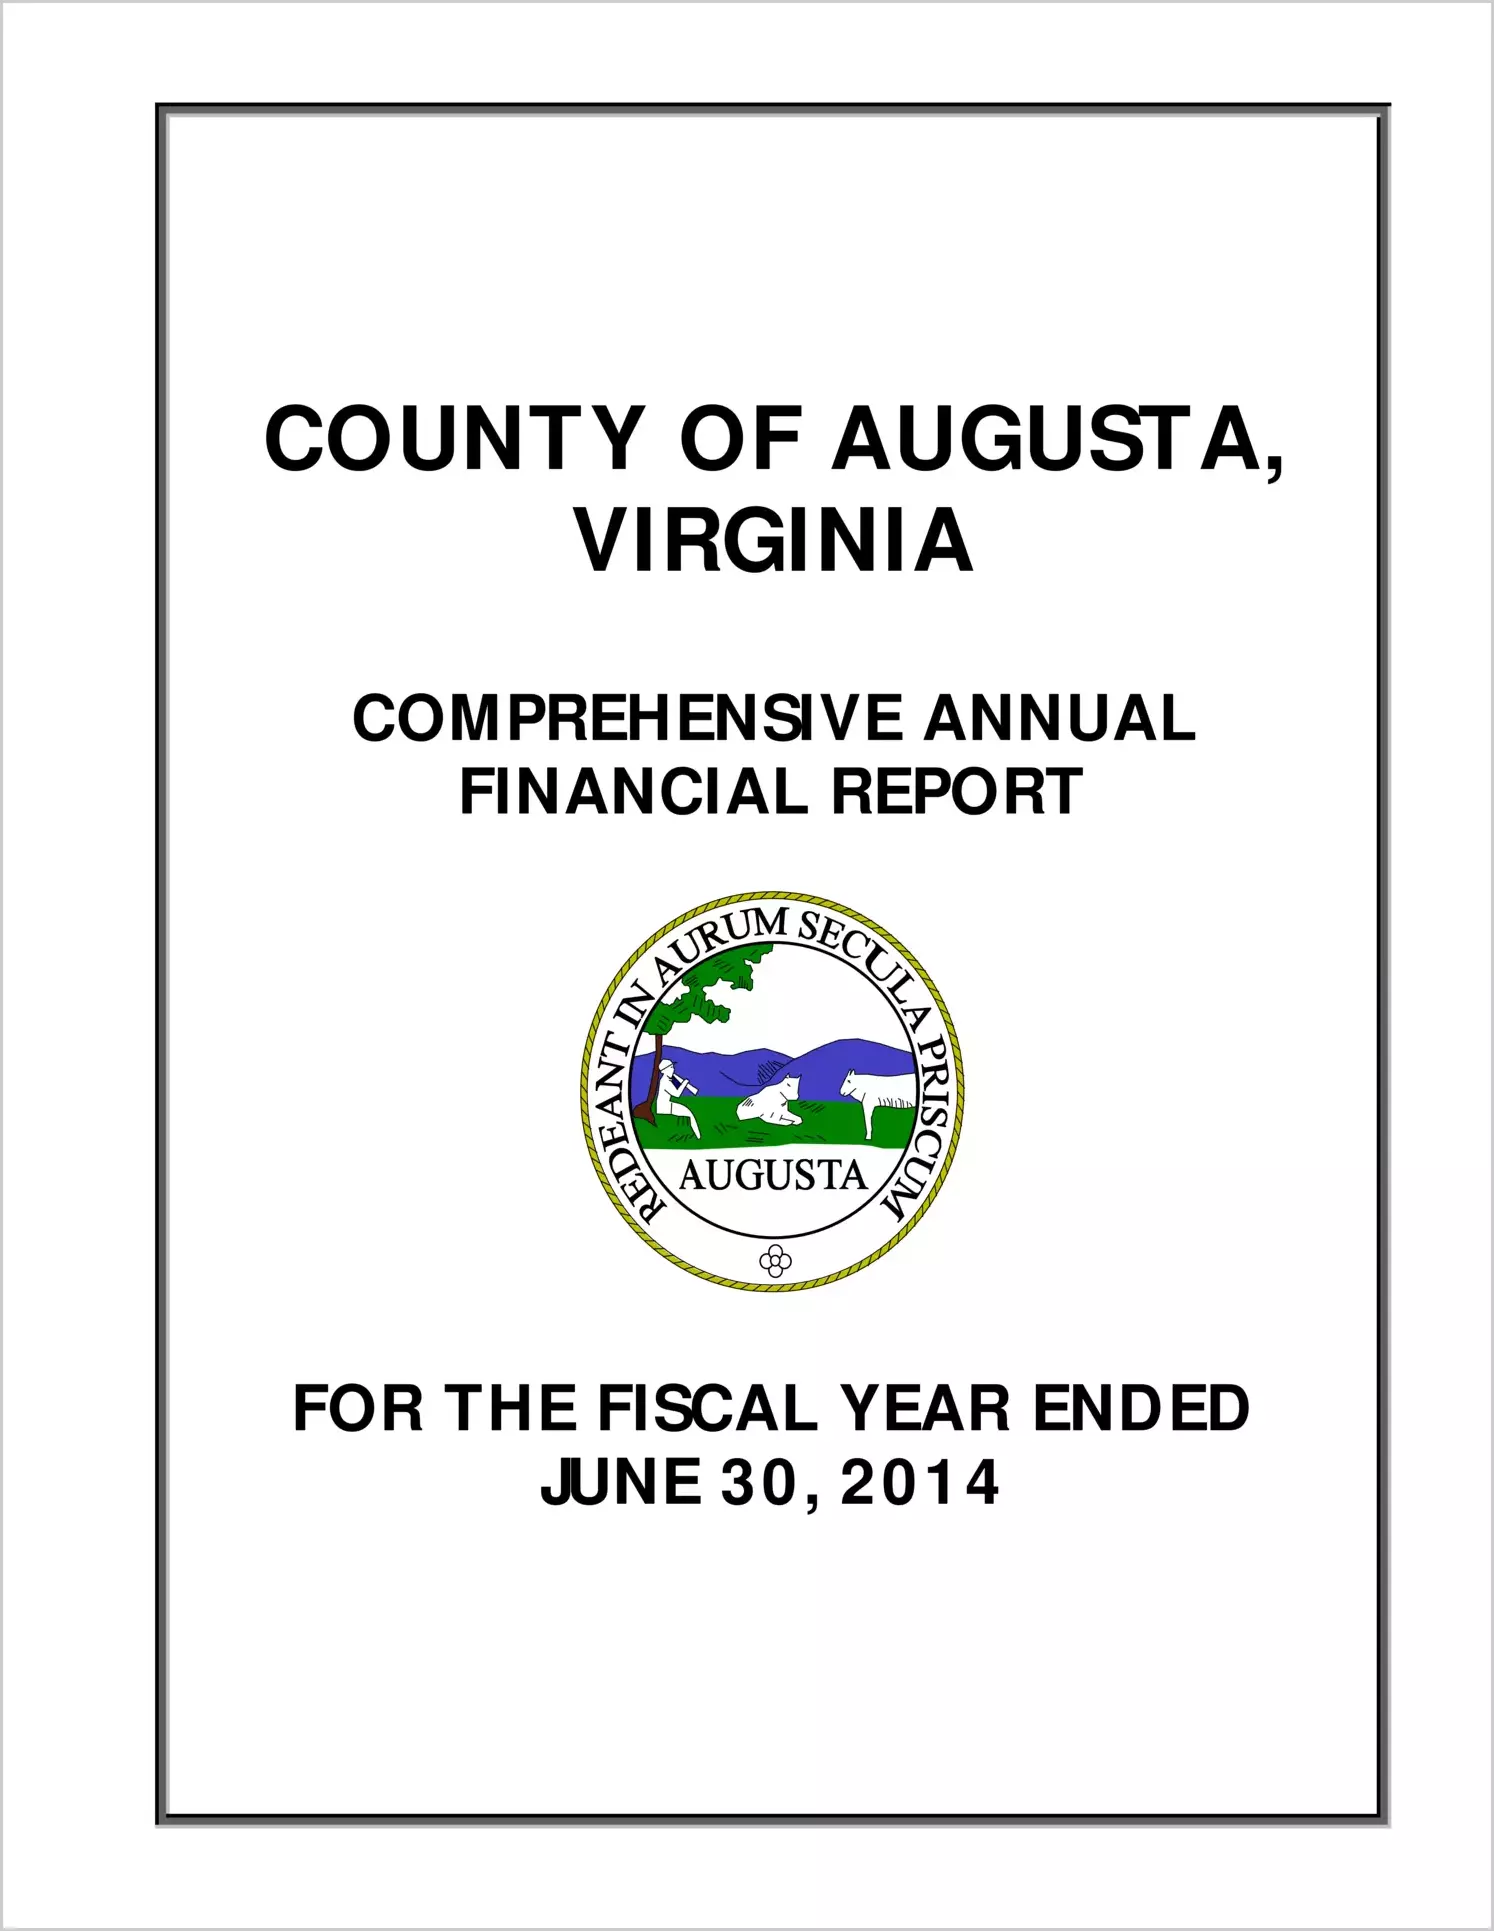 2014 Annual Financial Report for County of Augusta